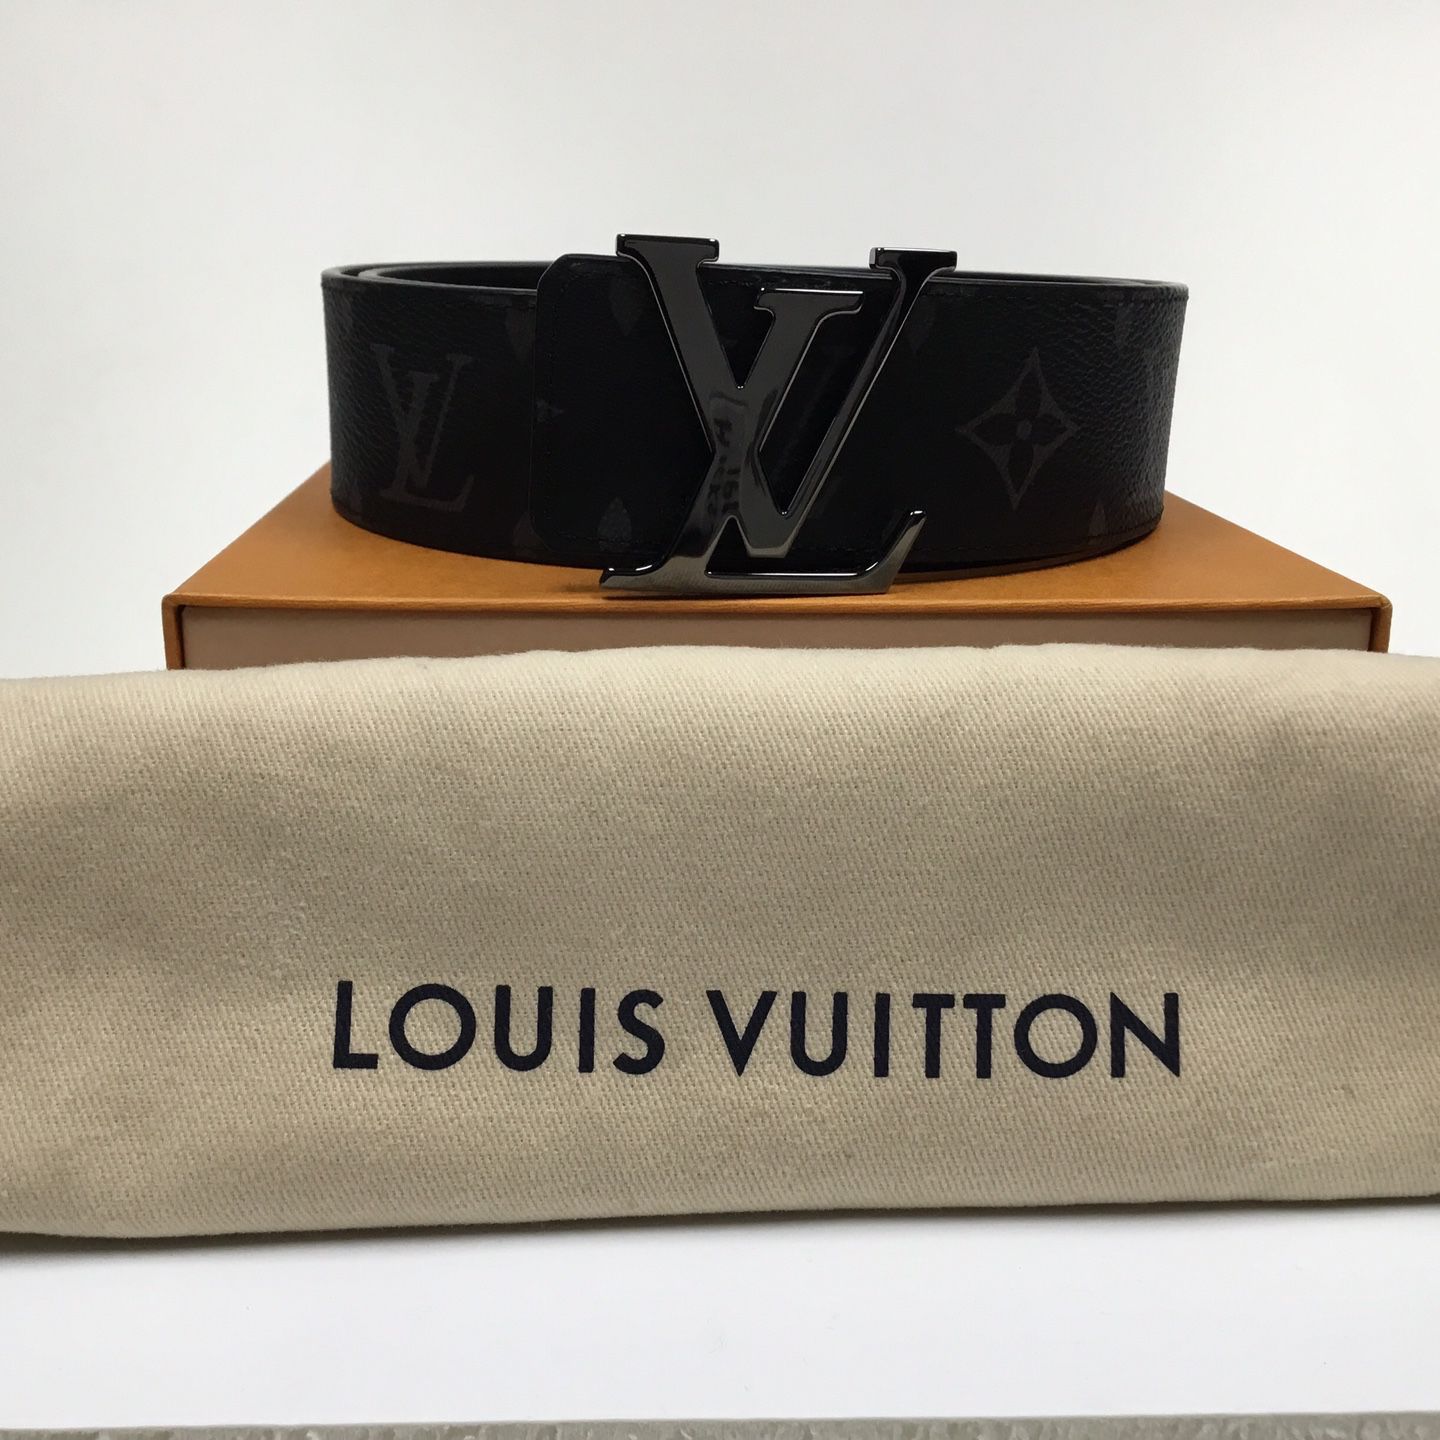 Louis Vuitton Fanny Pack for Sale in Hicksville, NY - OfferUp